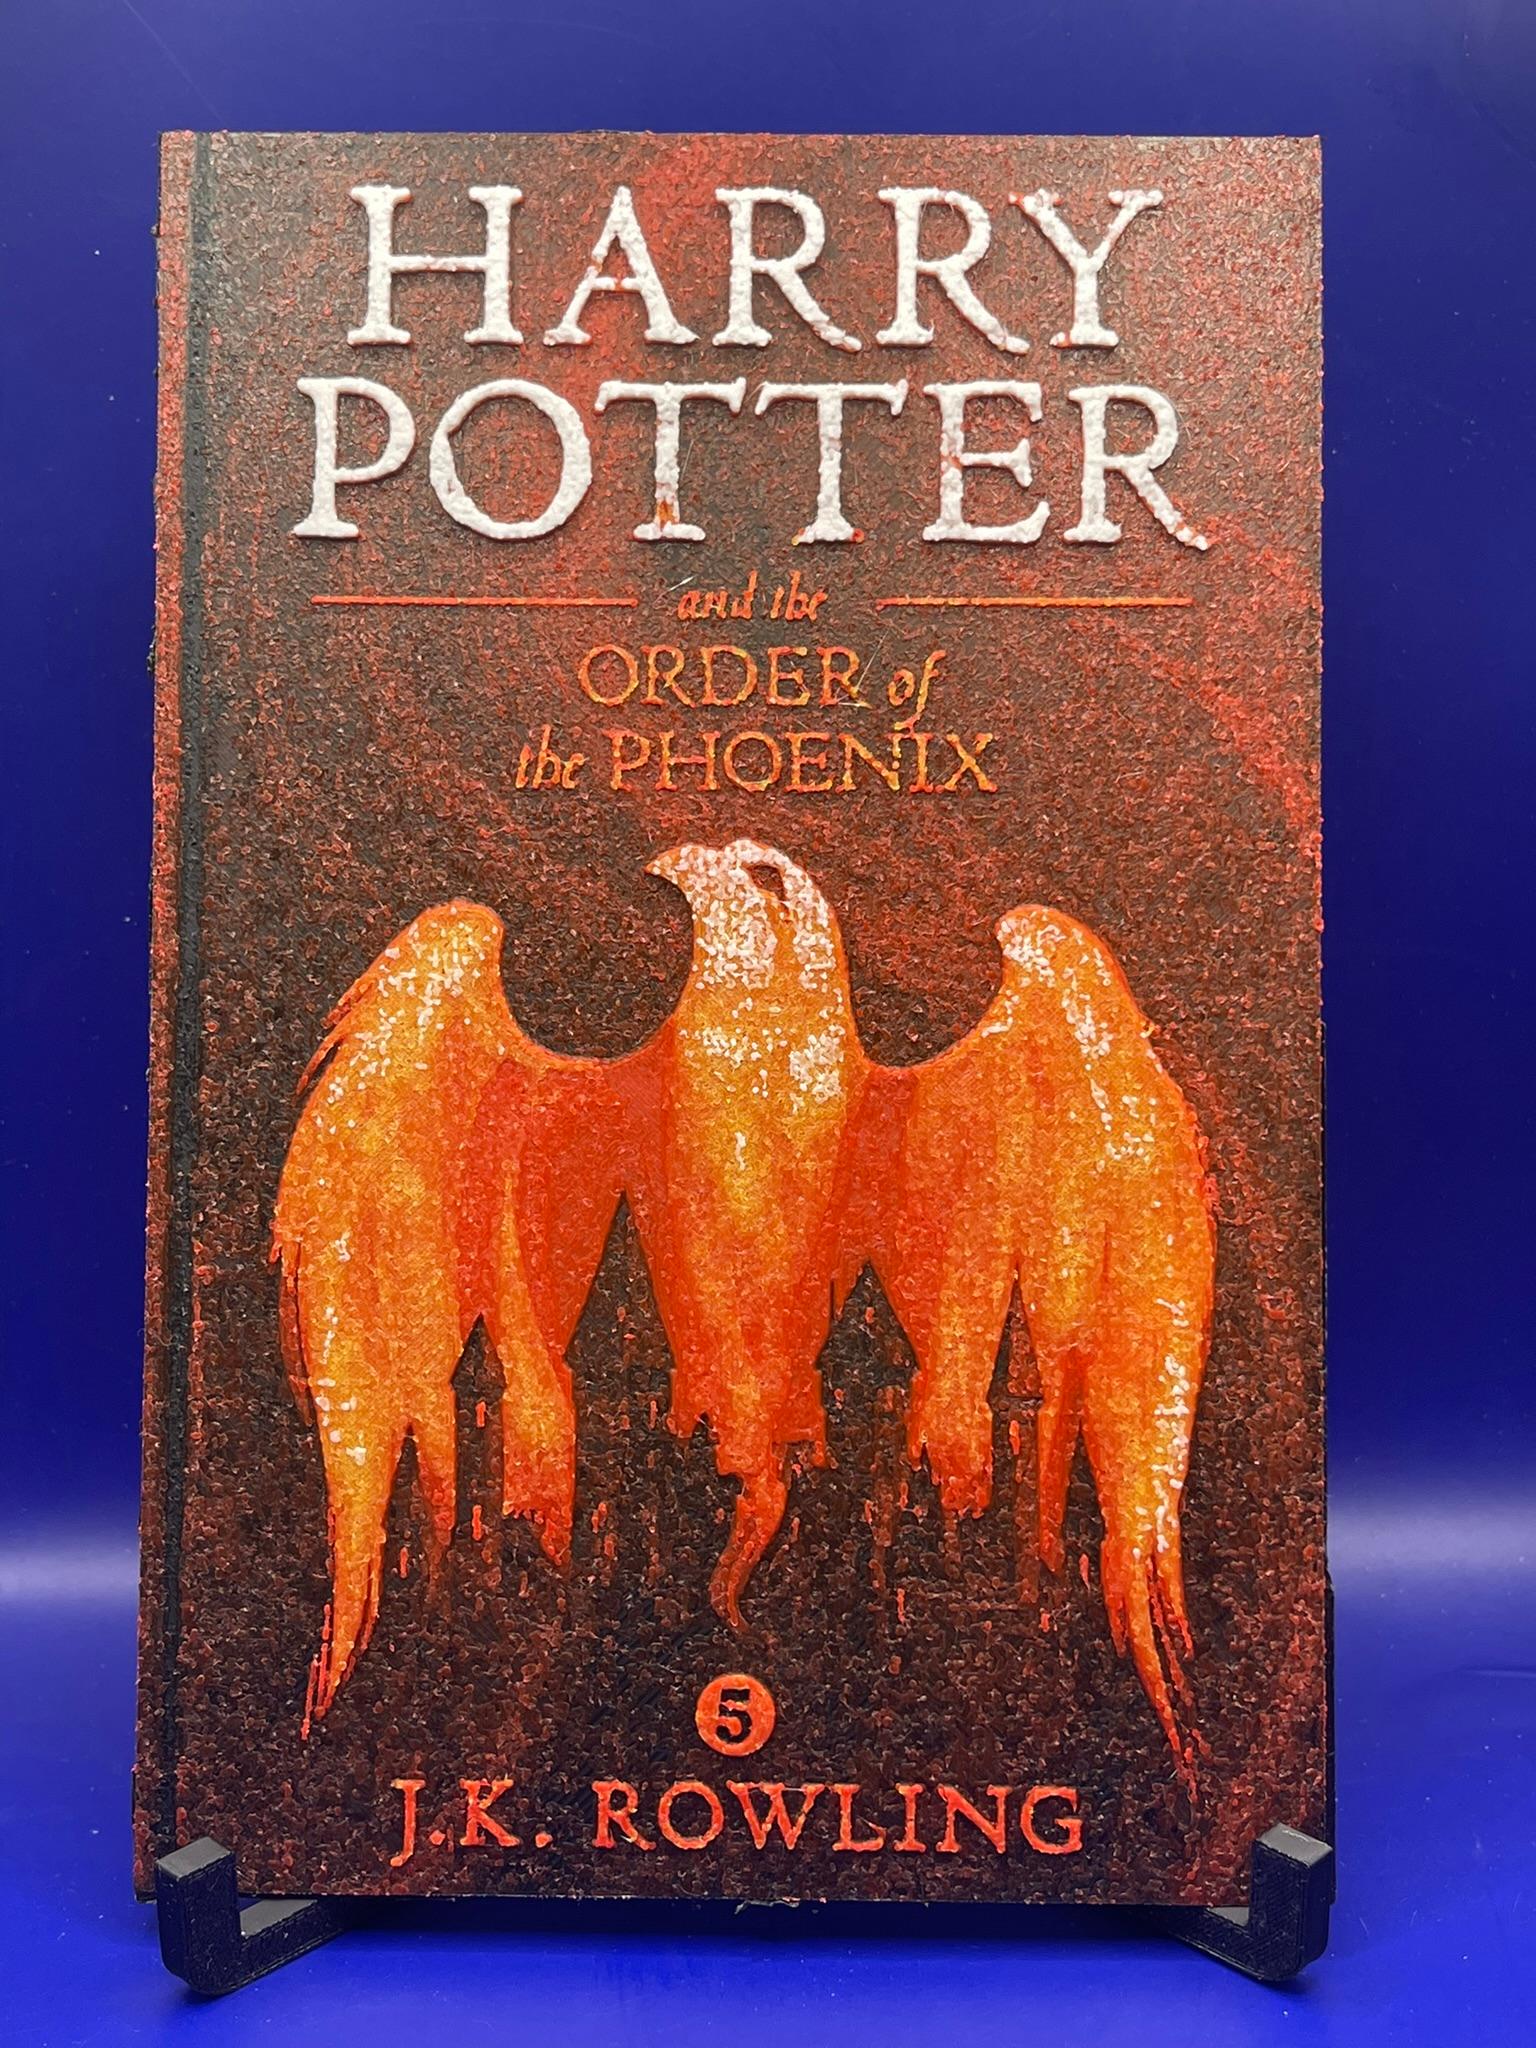 Harry Potter and the Order of the Phoenix HueForge Book Cover 3d model